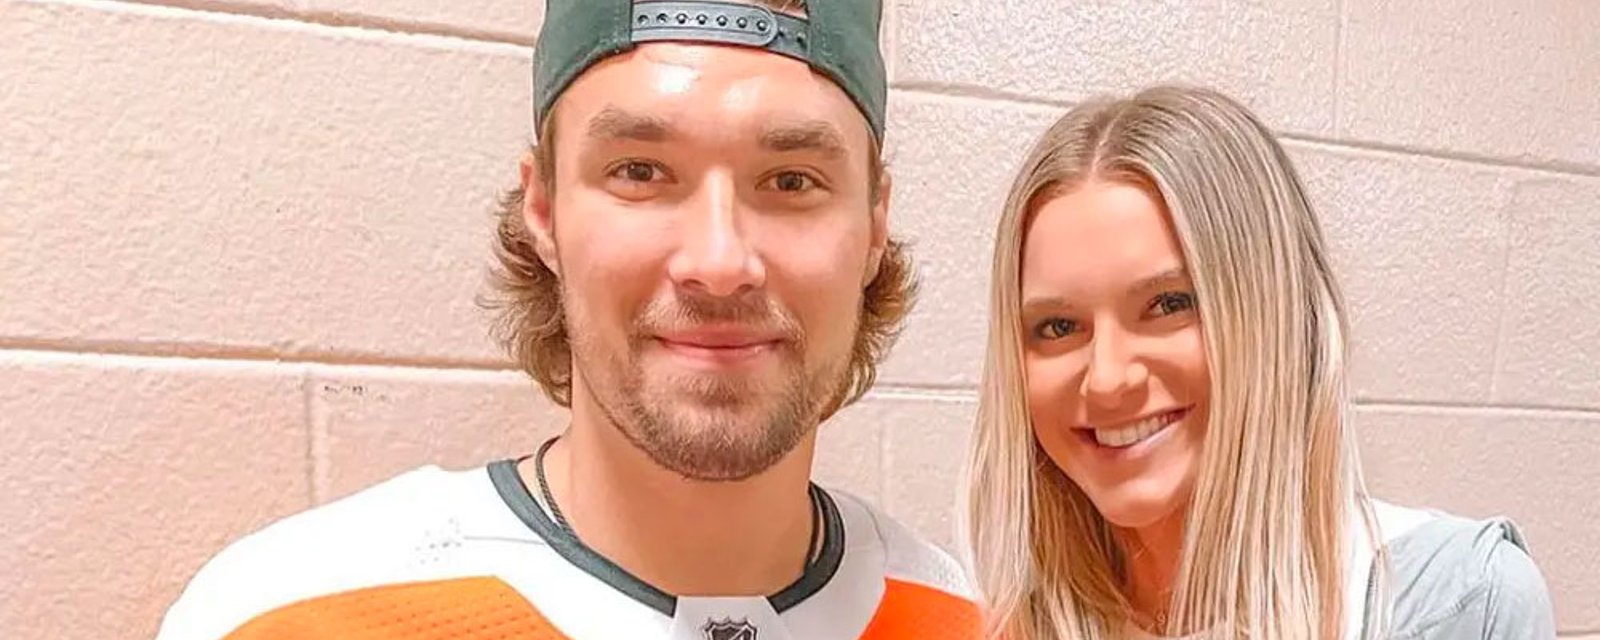 Provorov's girlfriend surprises him for his 26th birthday